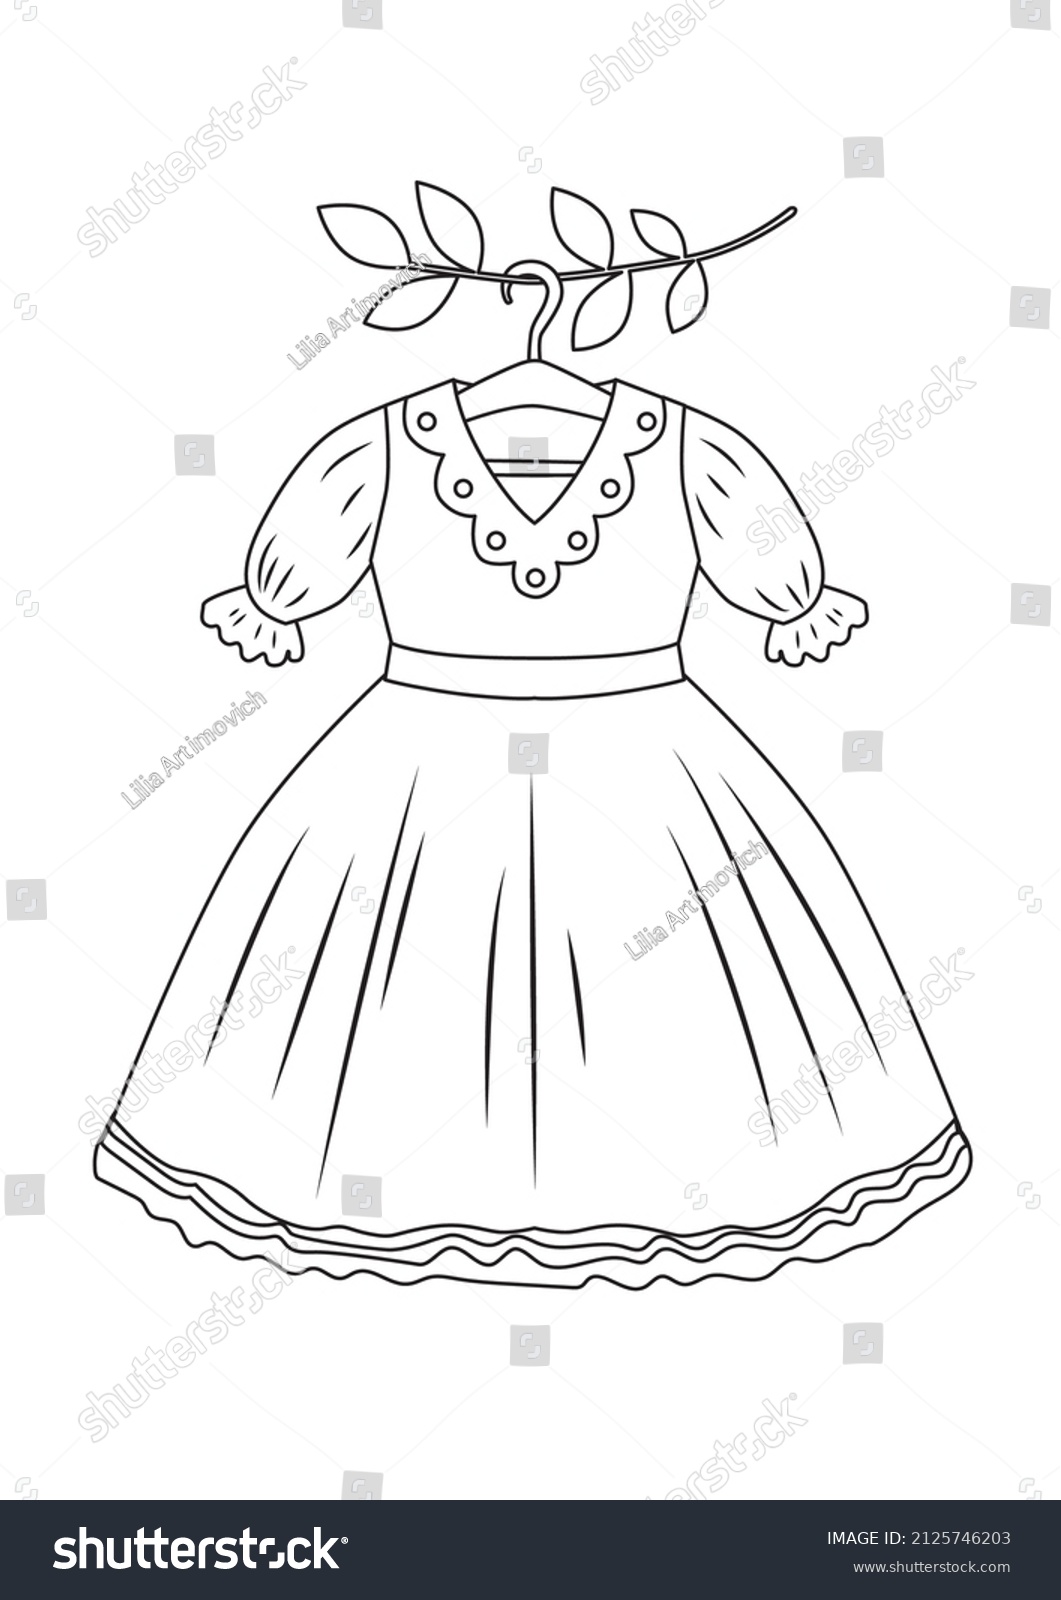 Coloring Page Princess Dress Outline Cartoon Stock Vector (Royalty Free) 2125746203 | Shutterstock